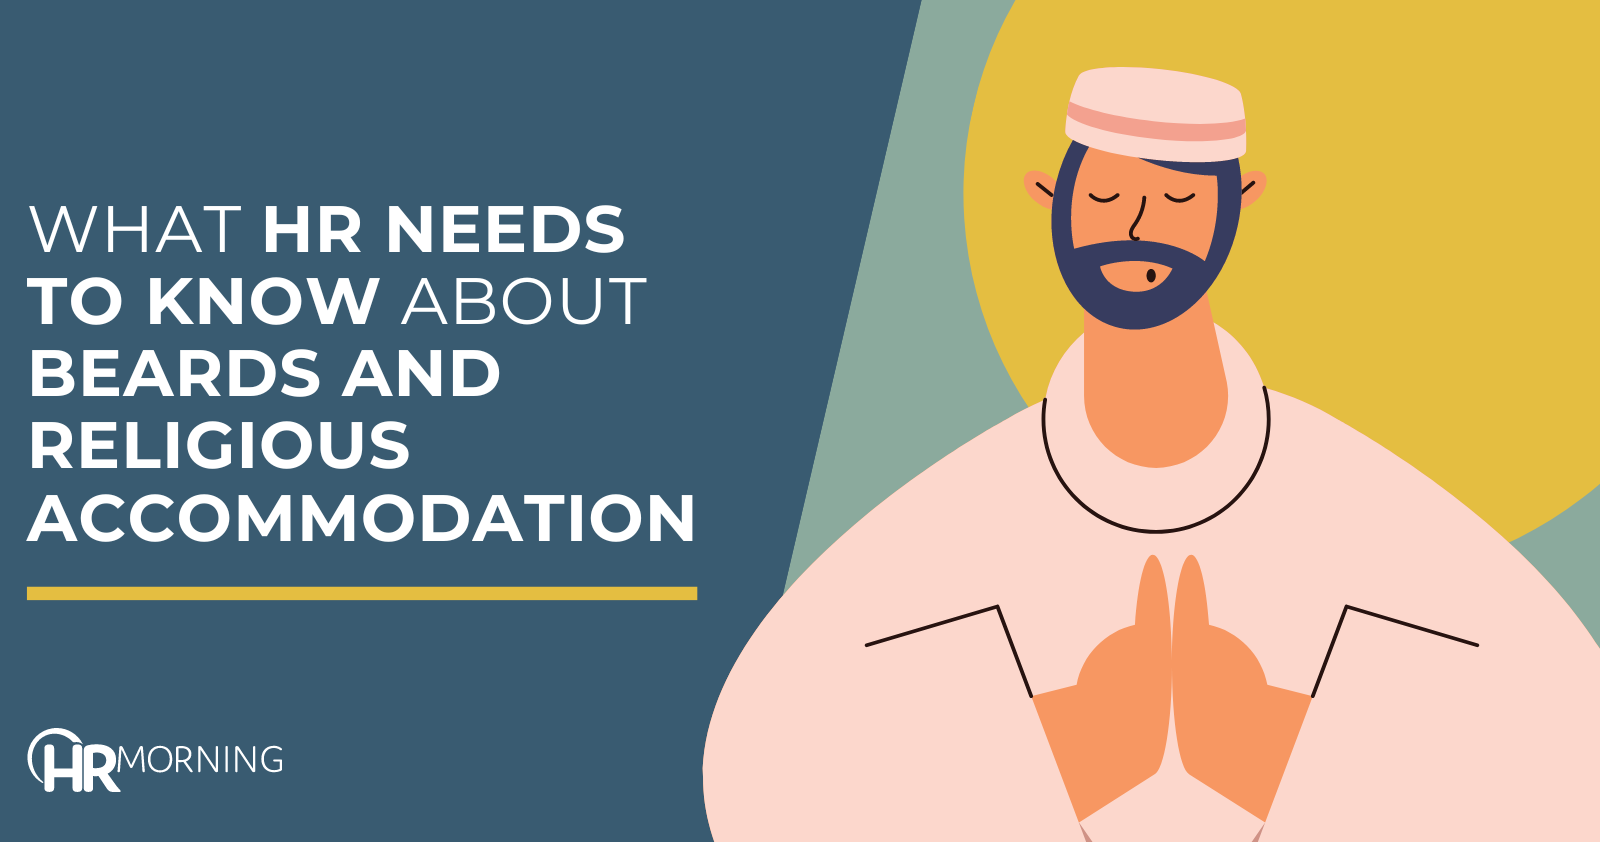 What HR needs to know about beards and religious accommodation